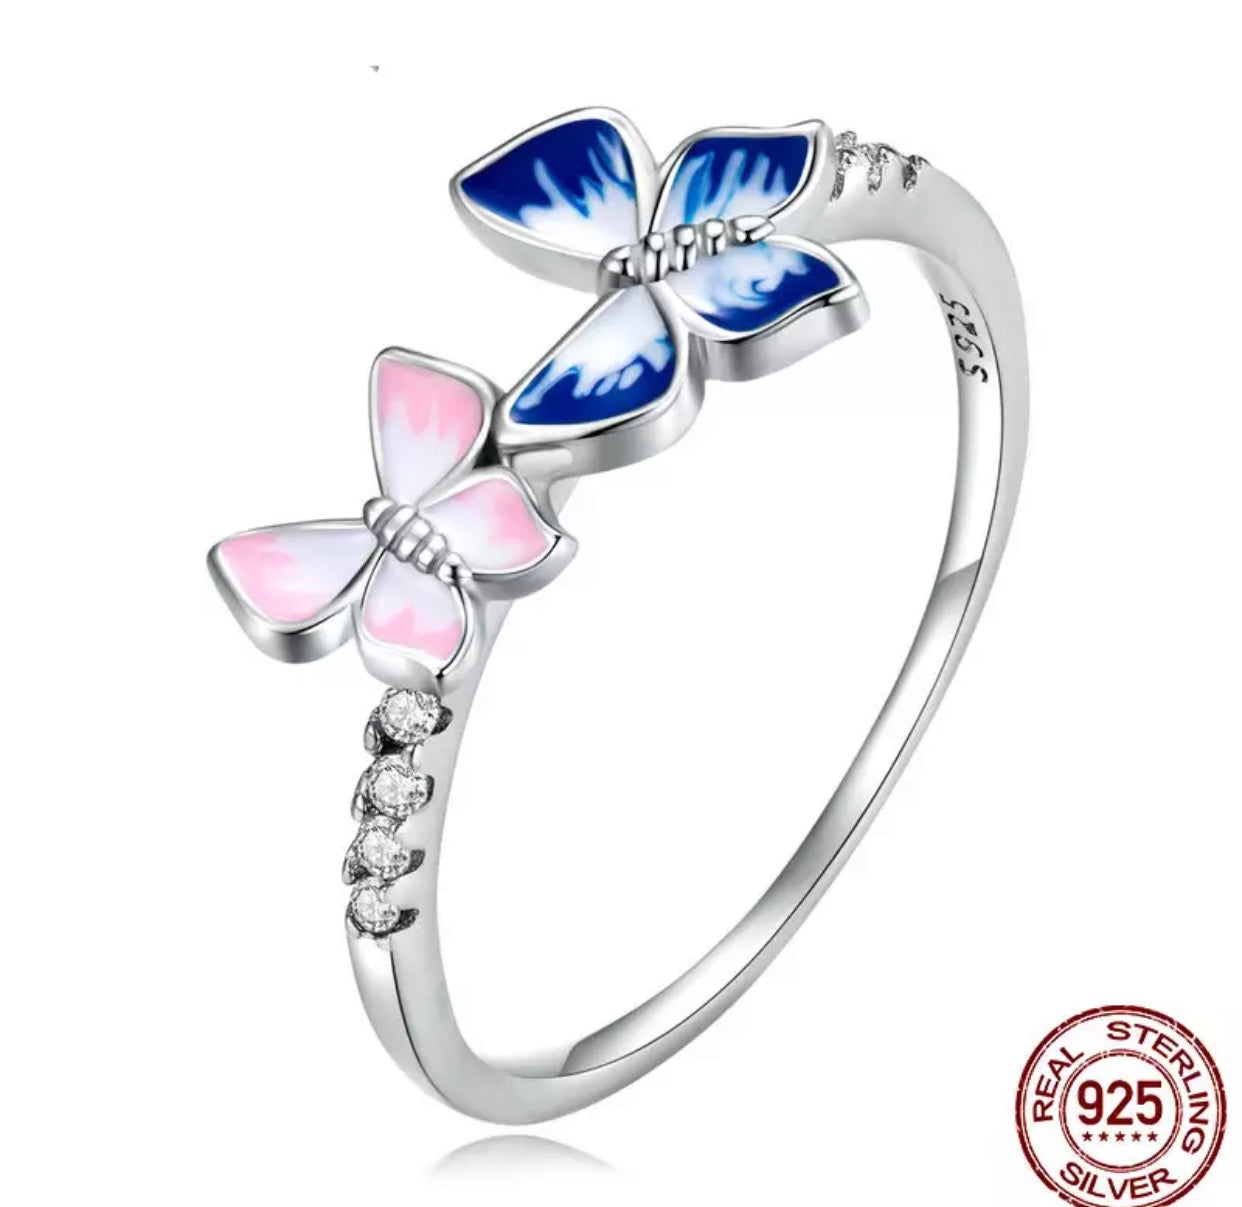 MARIPOSA STERLING SILVER BUTTERFLY RING SET WITH CUBIC ZIRCONIA